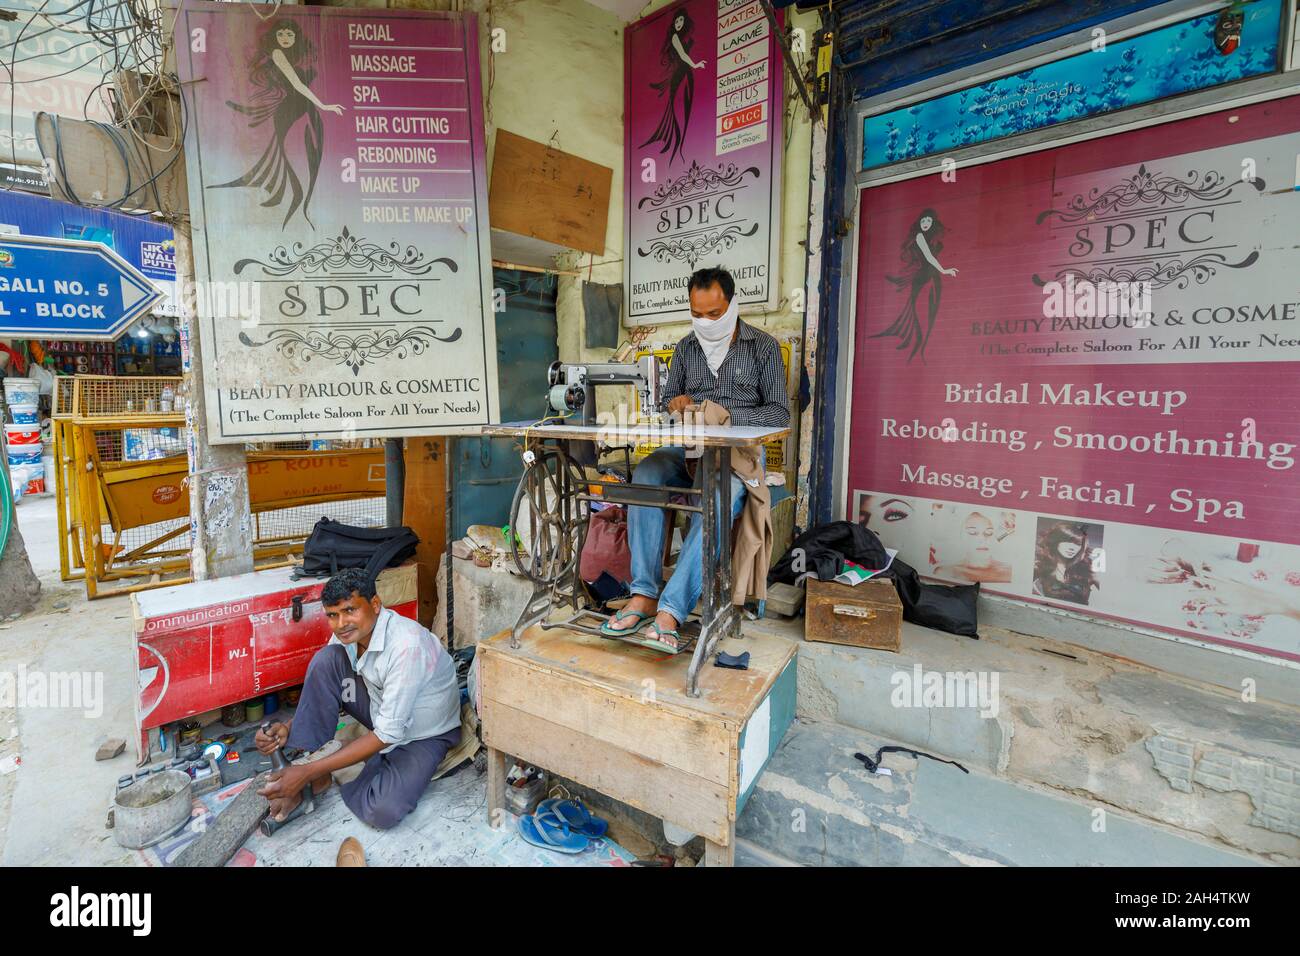 Street scene, Mahipalpur district, a suburb near Delhi Airport in New Delhi, capital of India: local man working with an old-fashioned sewing machine Stock Photo